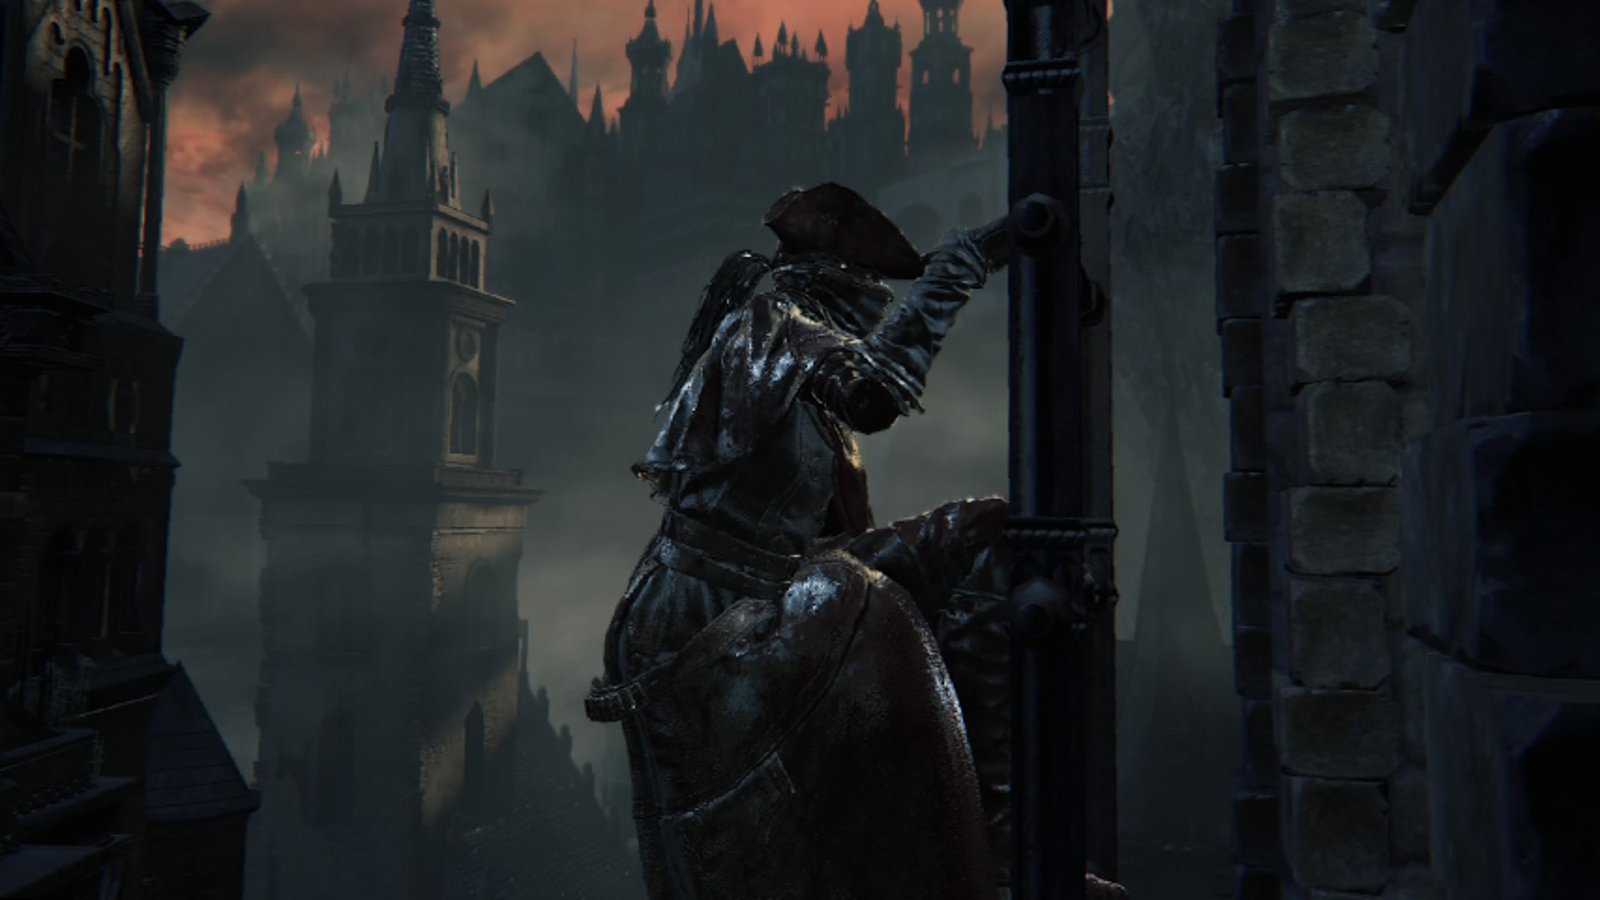 Bloodborne On PC FINALLY Happening? - These Rumors Are Wild 